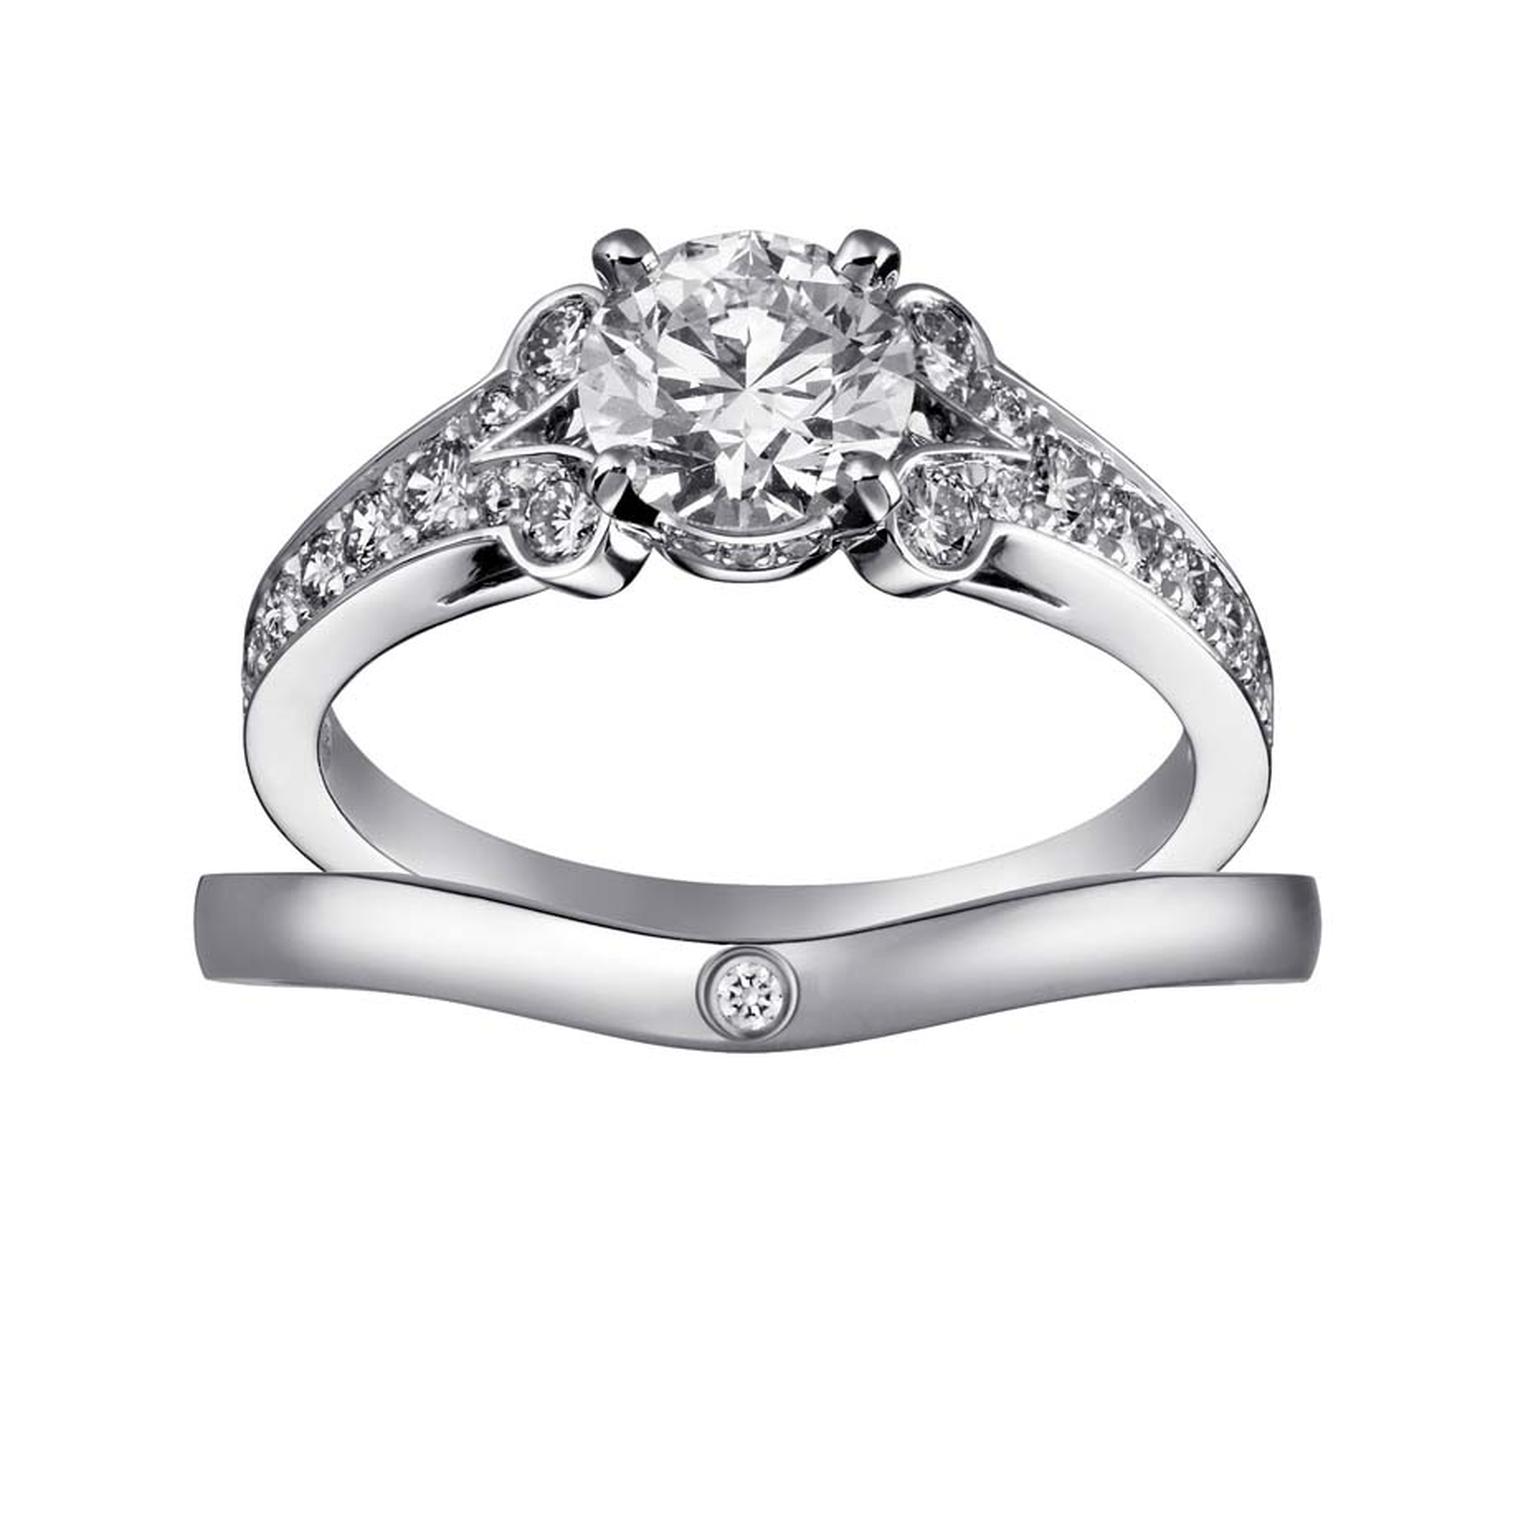 Cartier Solitaire Ballerine solitaire diamond engagement ring and band.